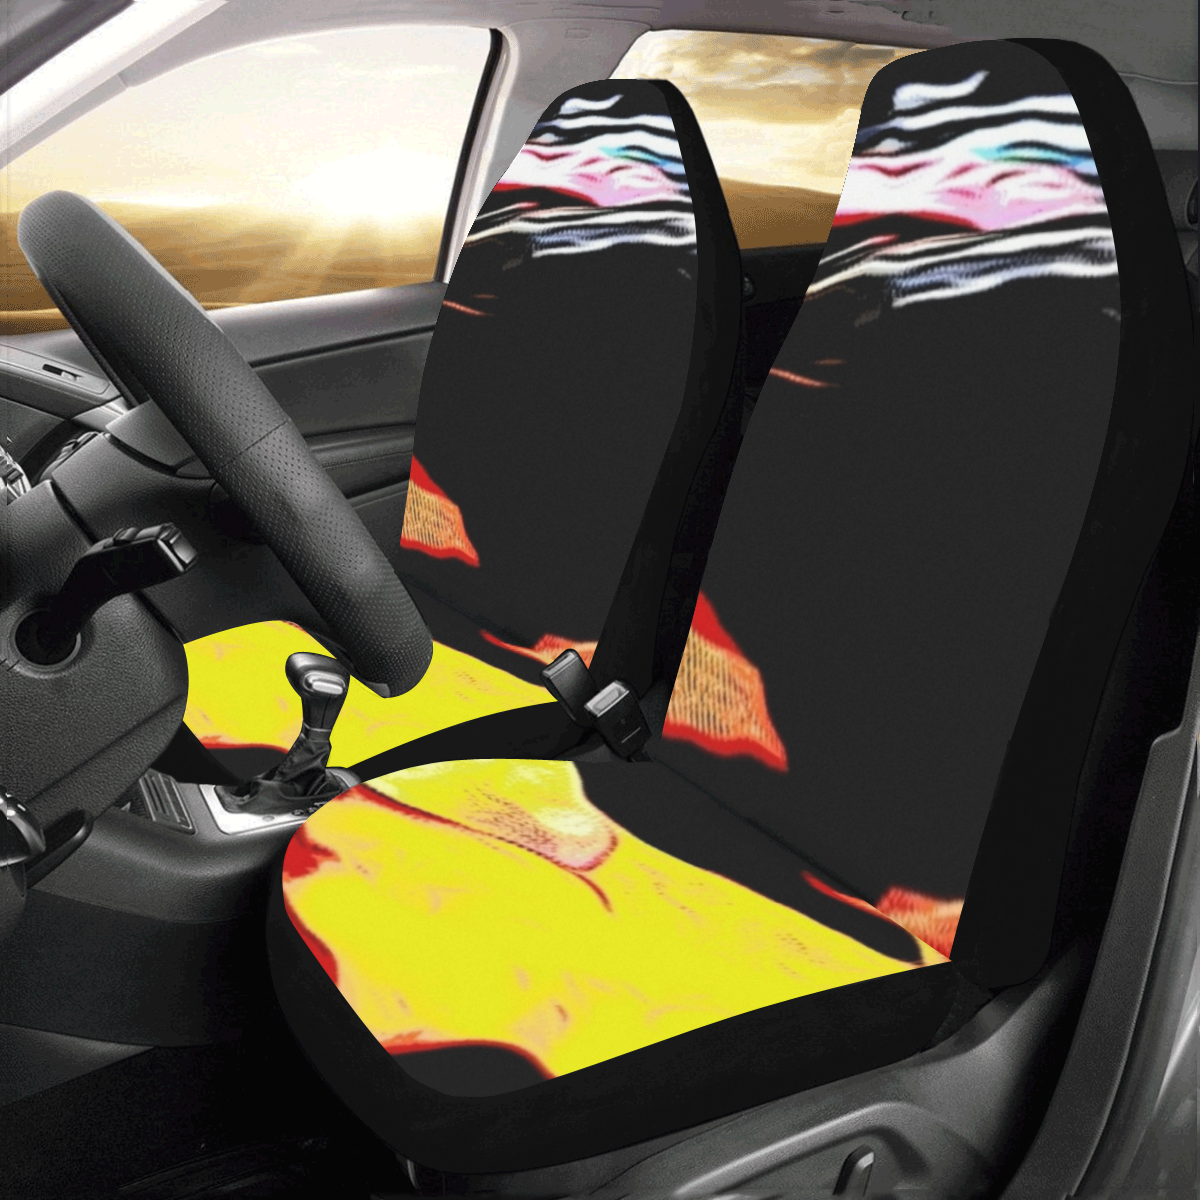 Planting Seeds Car Seat Covers (Set of 2)